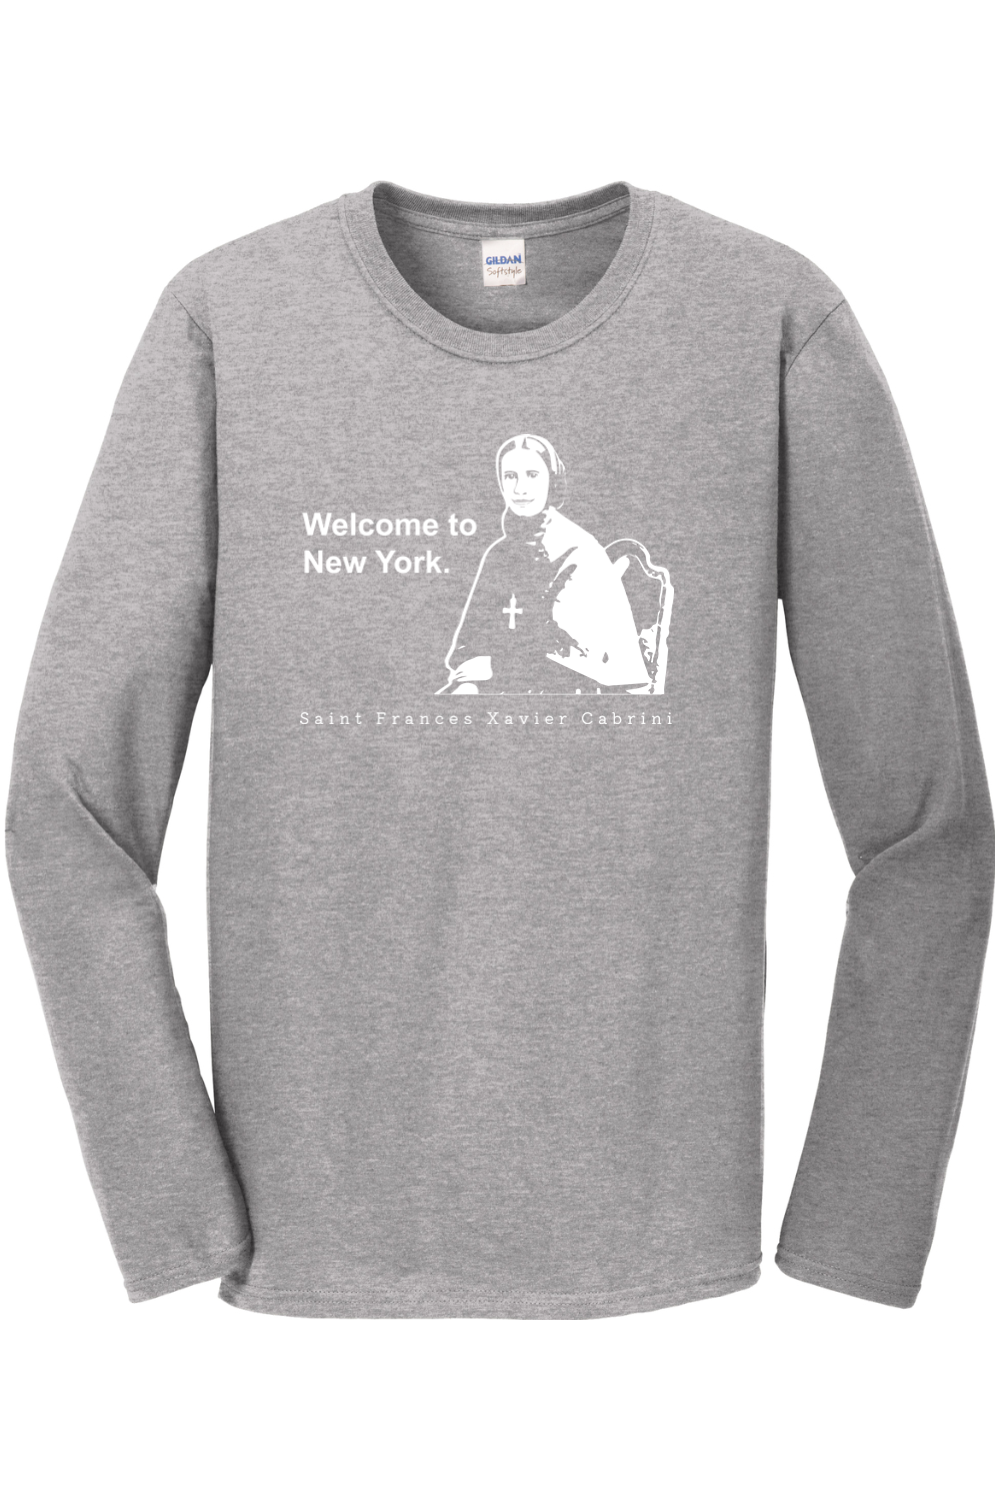 Welcome to New York - St. Frances Cabrini Long Sleeve